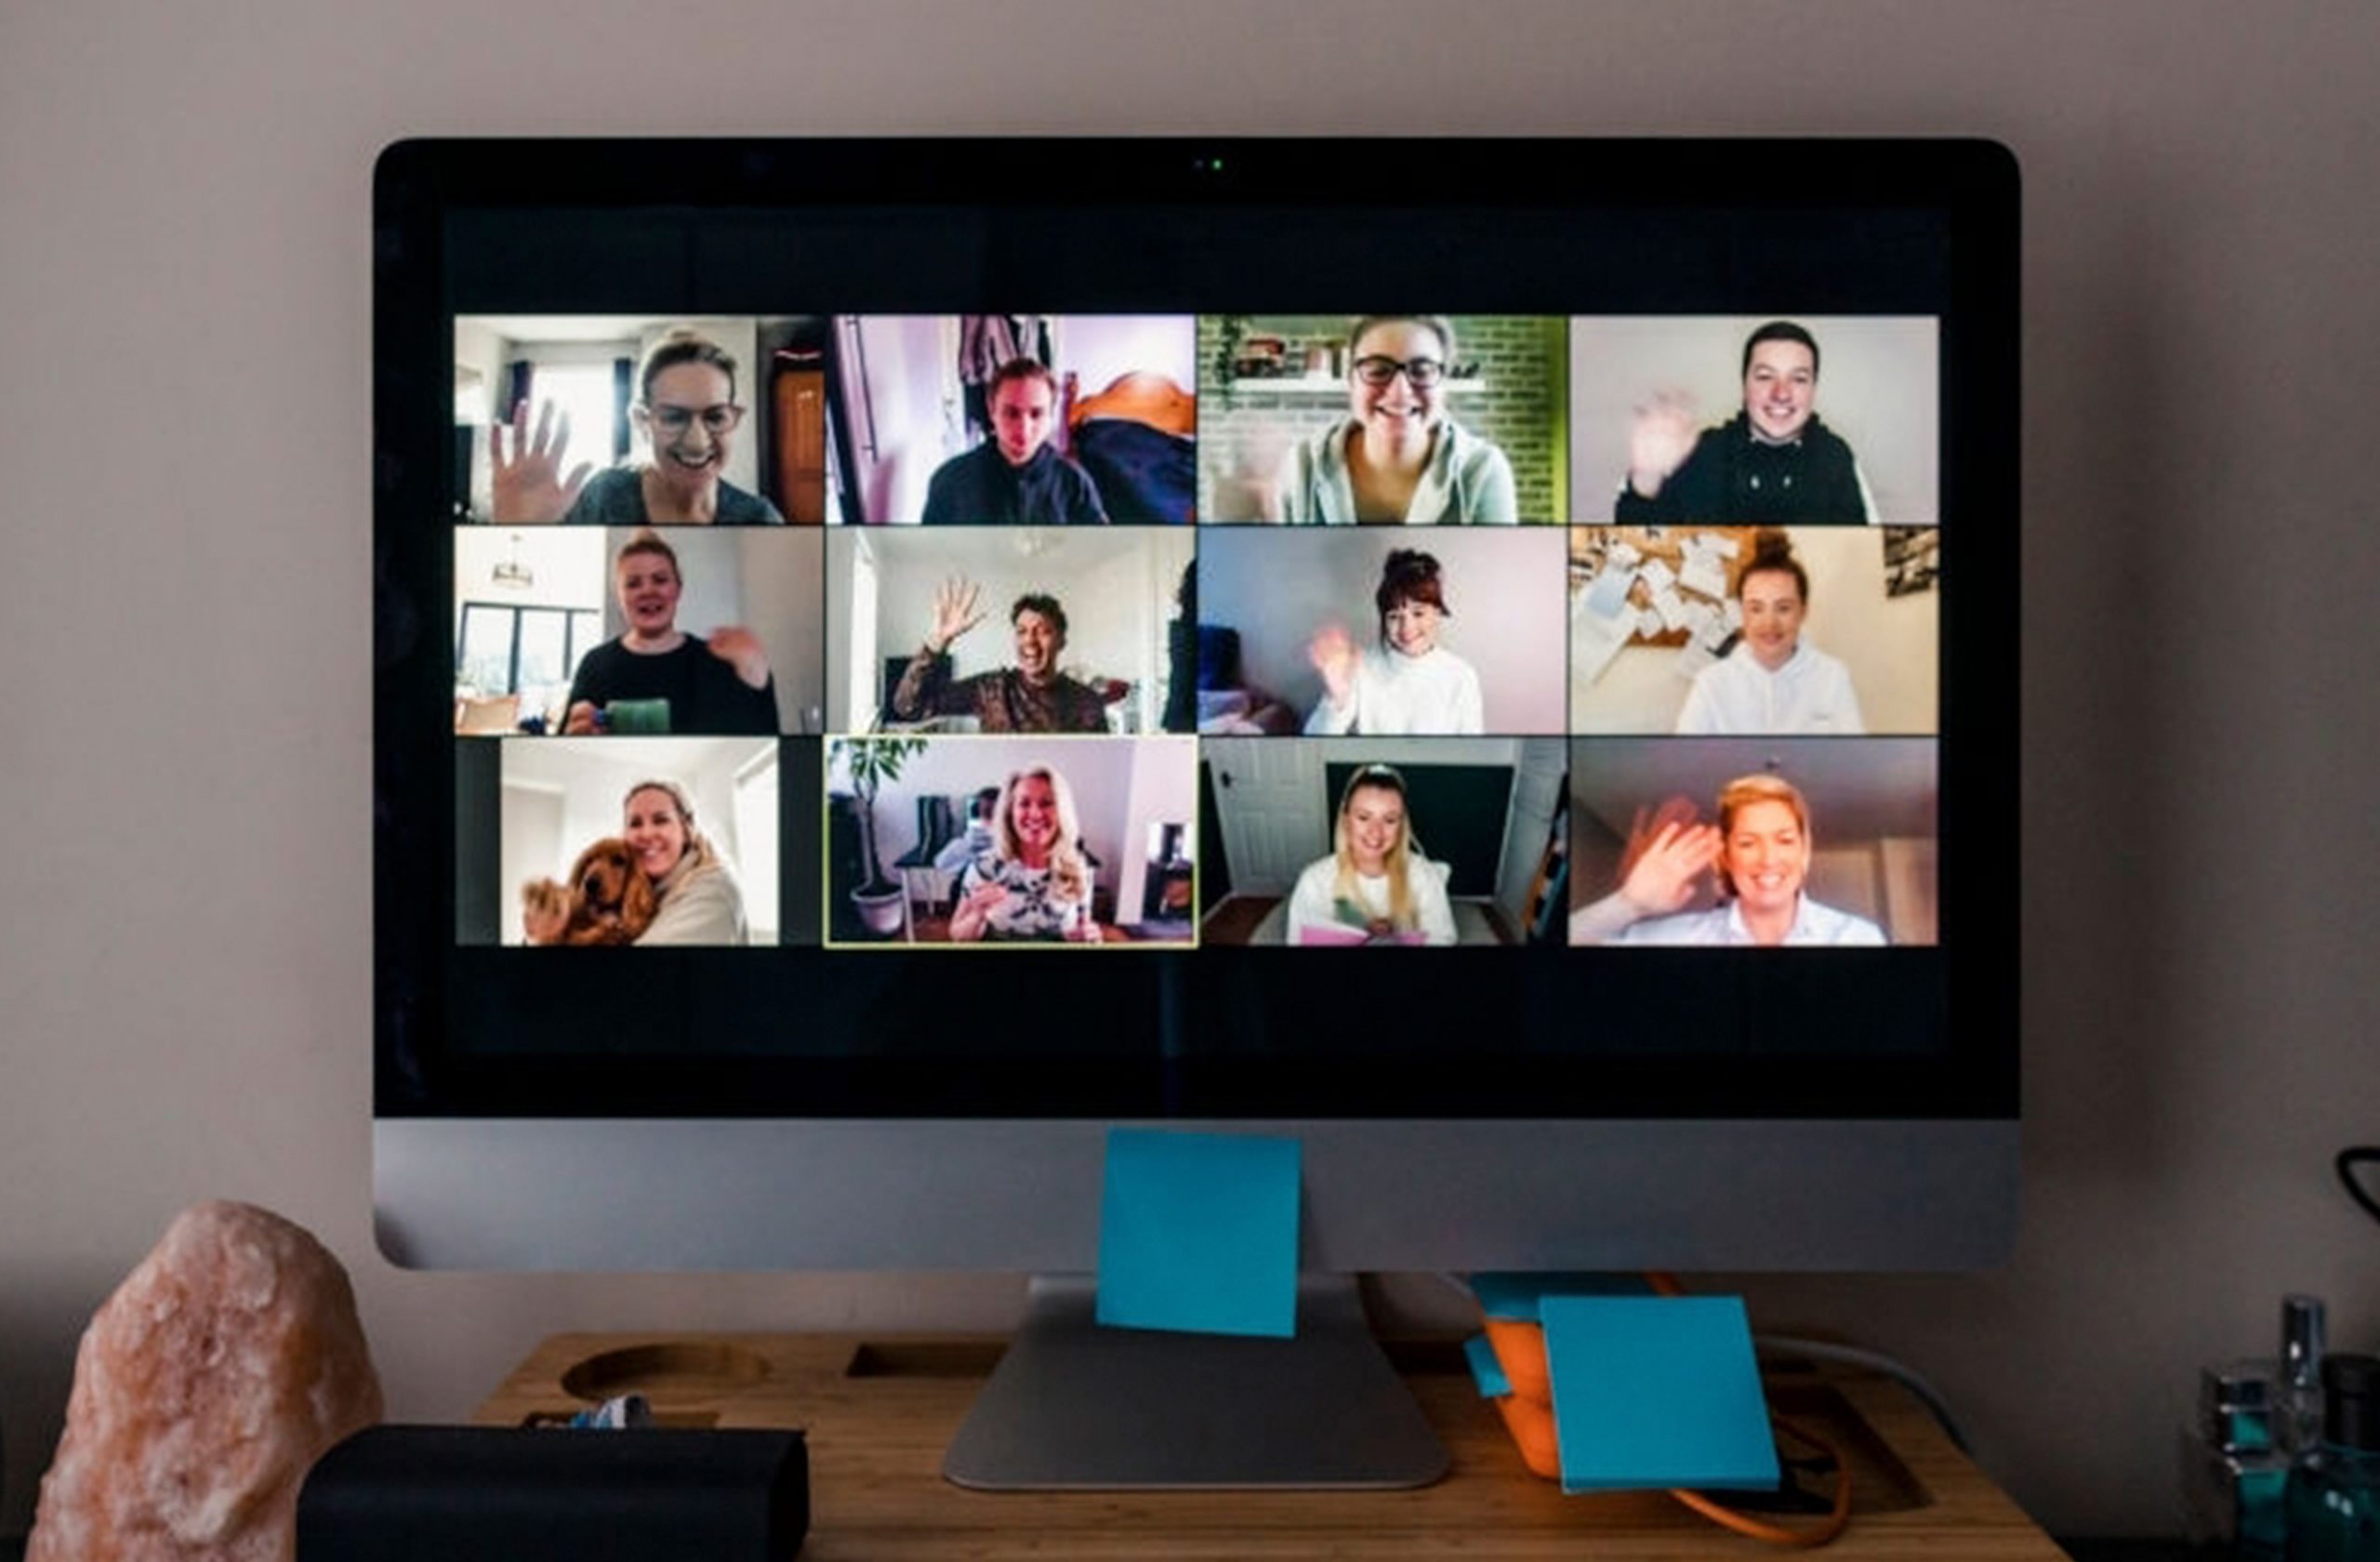 Computer desktop screen showing a video conference with 12 people each waiving.